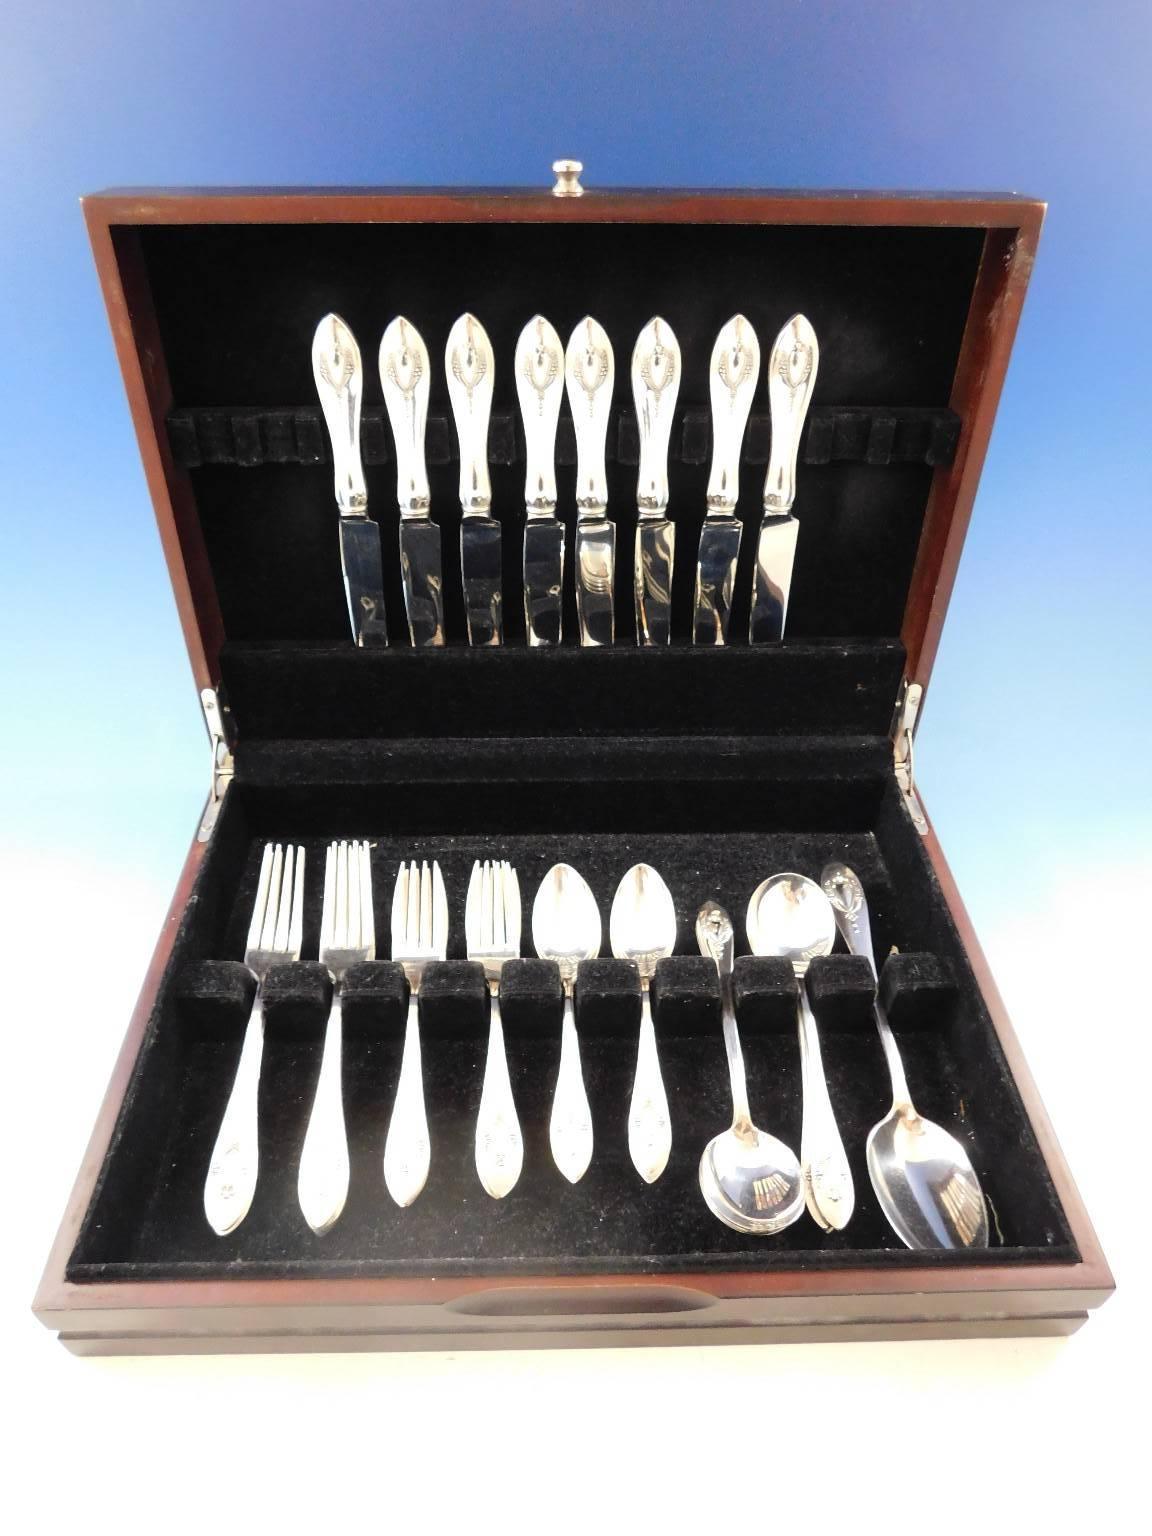 Mount Vernon by Lunt sterling silver flatware set, 41 pieces. This set includes:

    8 Knives, 8 3/4